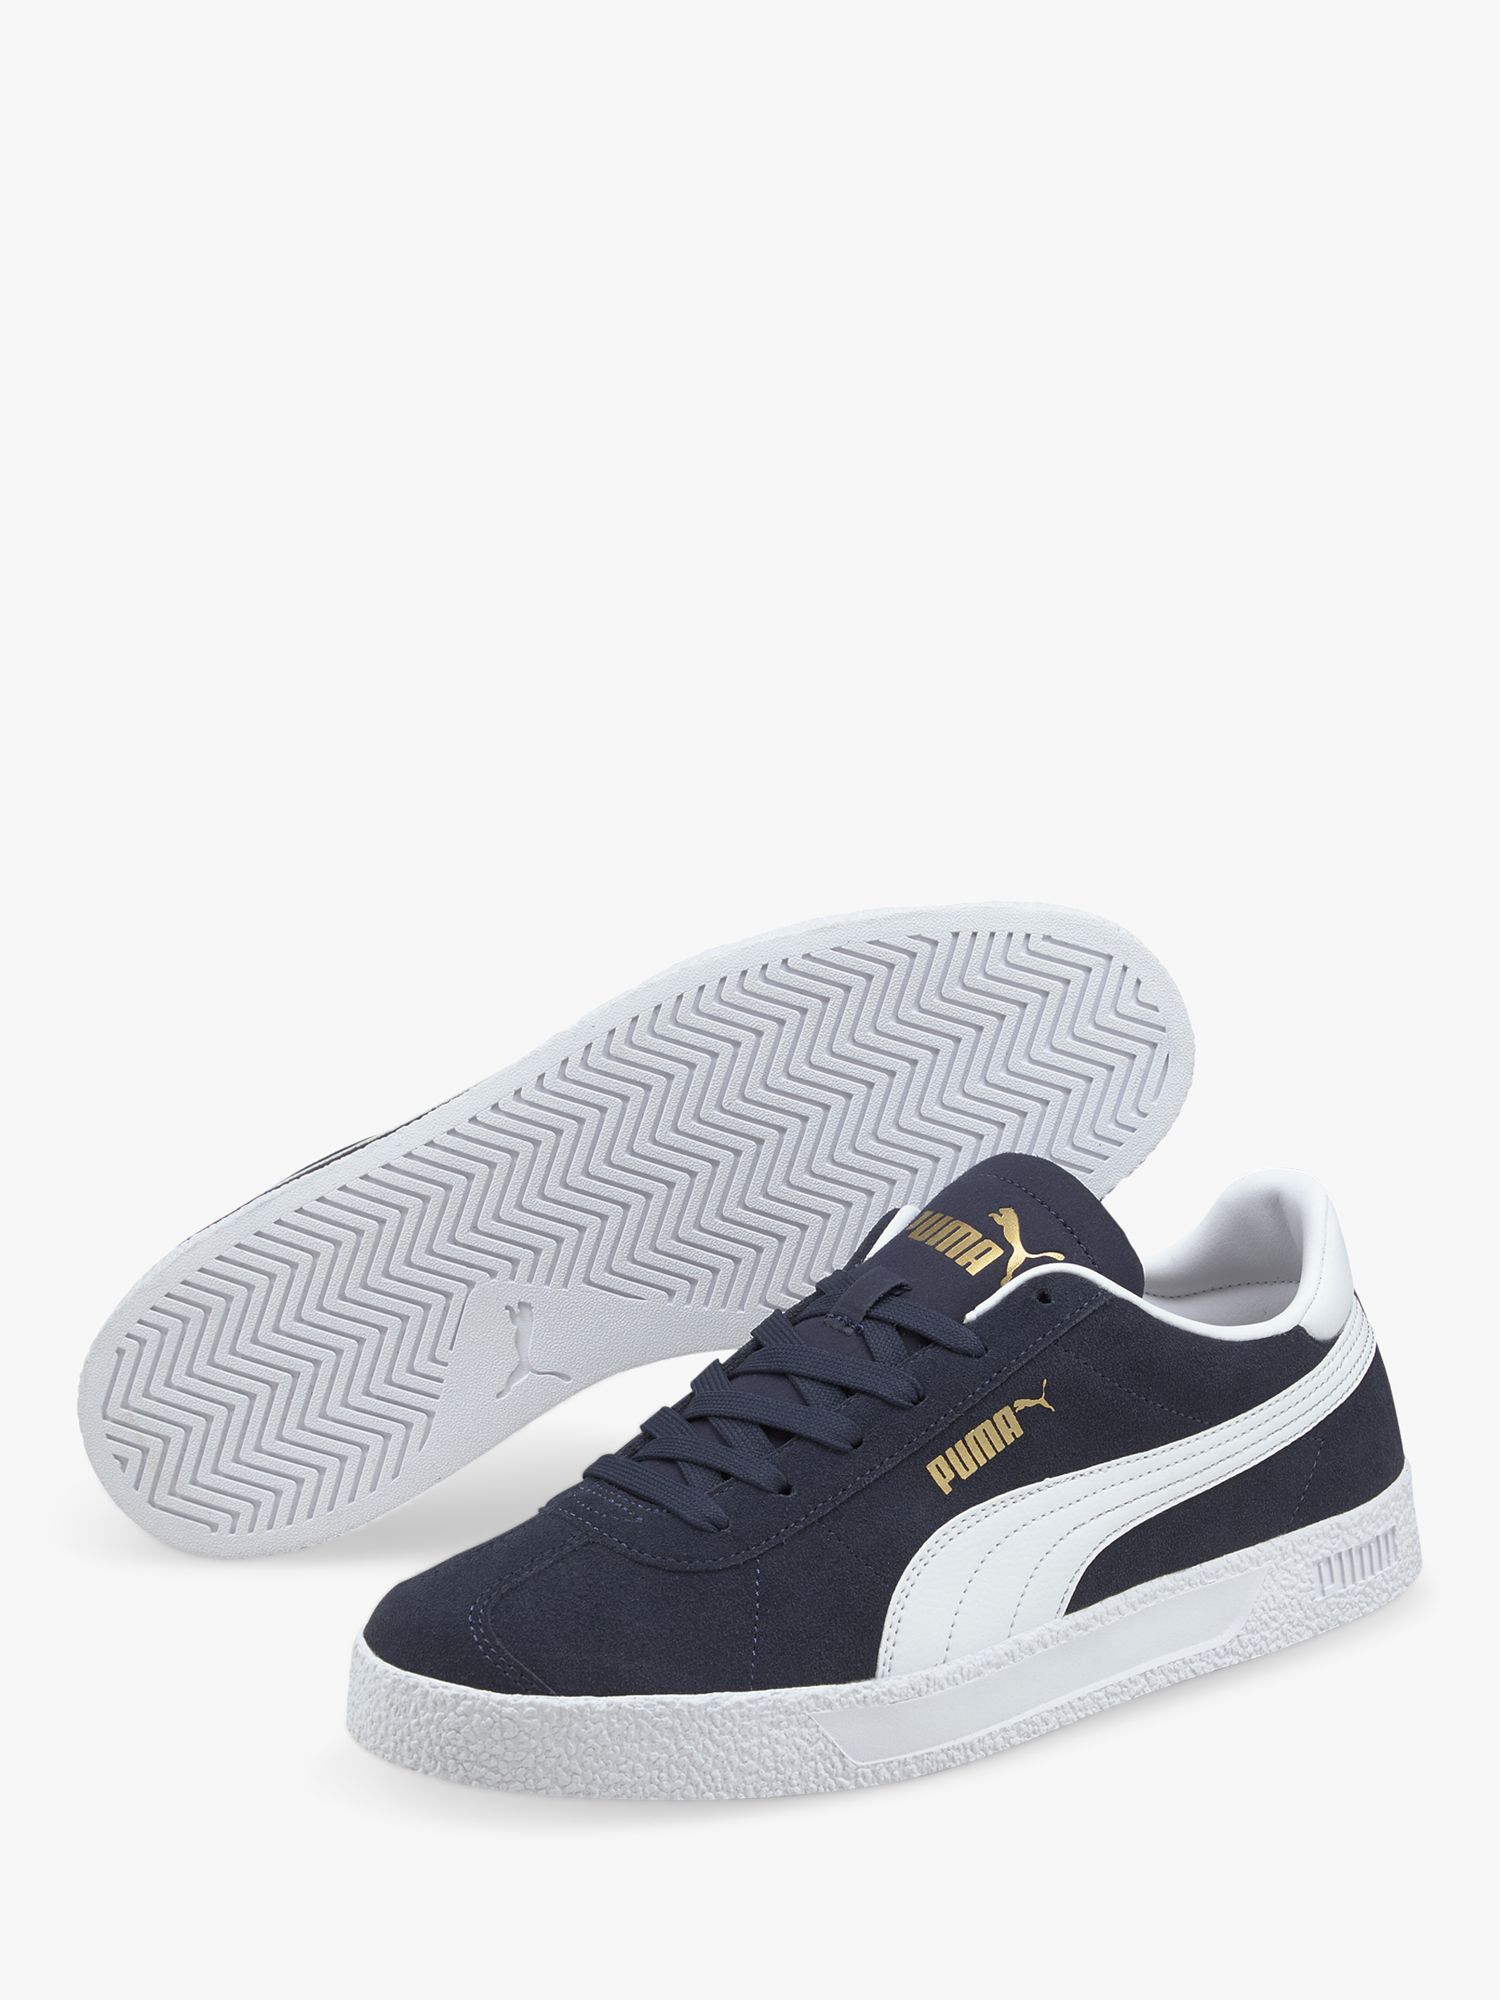 PUMA Club 5v5 Suede Lace Up Trainers, Navy/White, 8